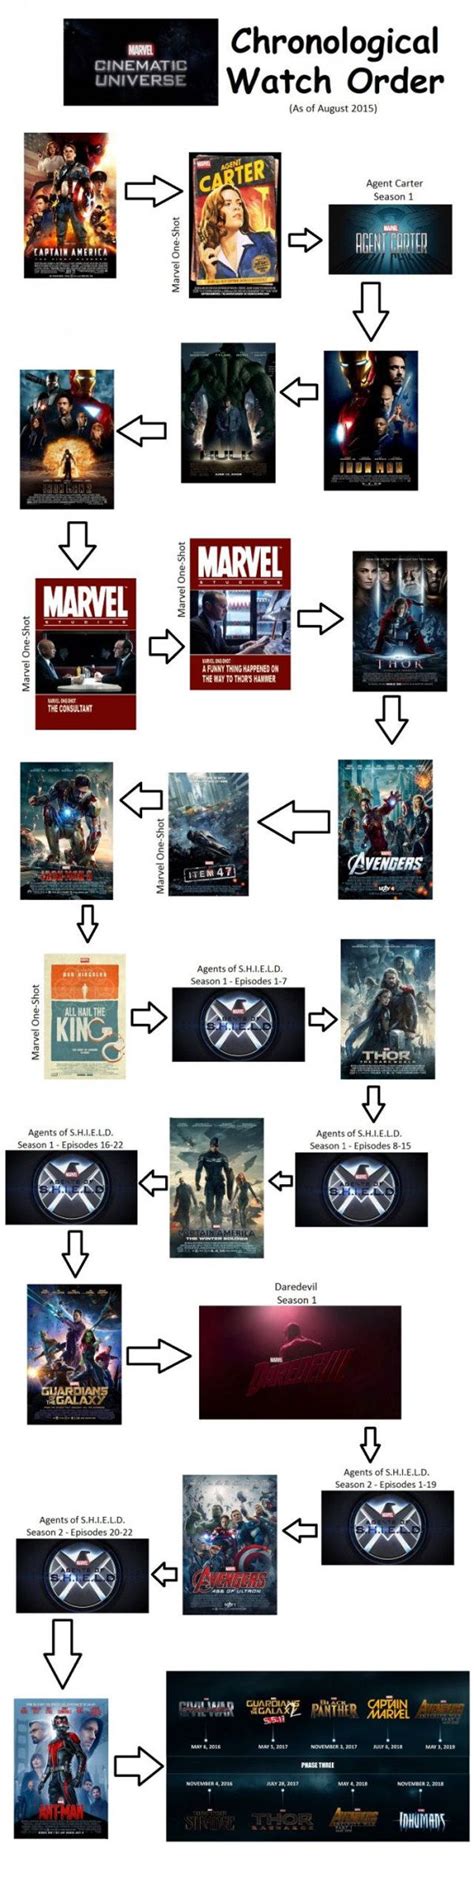 If you're going to watch marvel movies, you should watch them in chronological order (that is, in the order that events take place in the story) or in order of release. Marvel Cinematic Universe In Chronological Watch Order ...